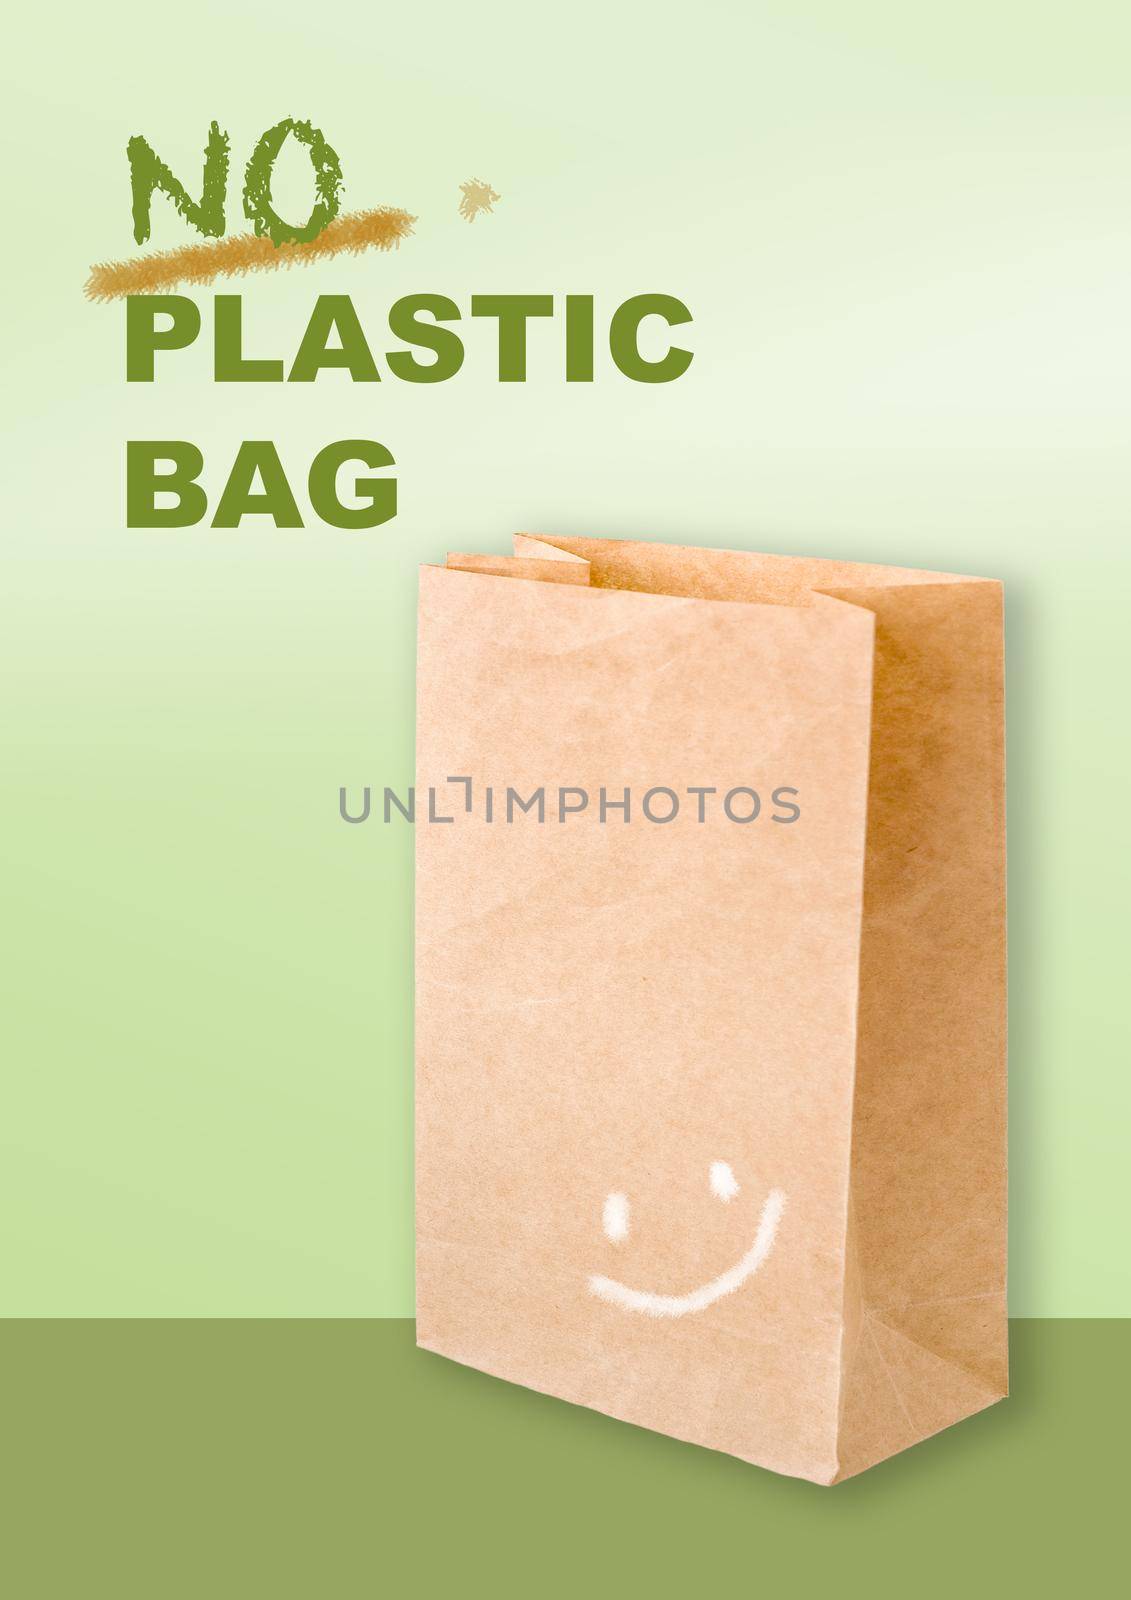 No plastic bag wording on green background with paper bag with smiling face in eco concept